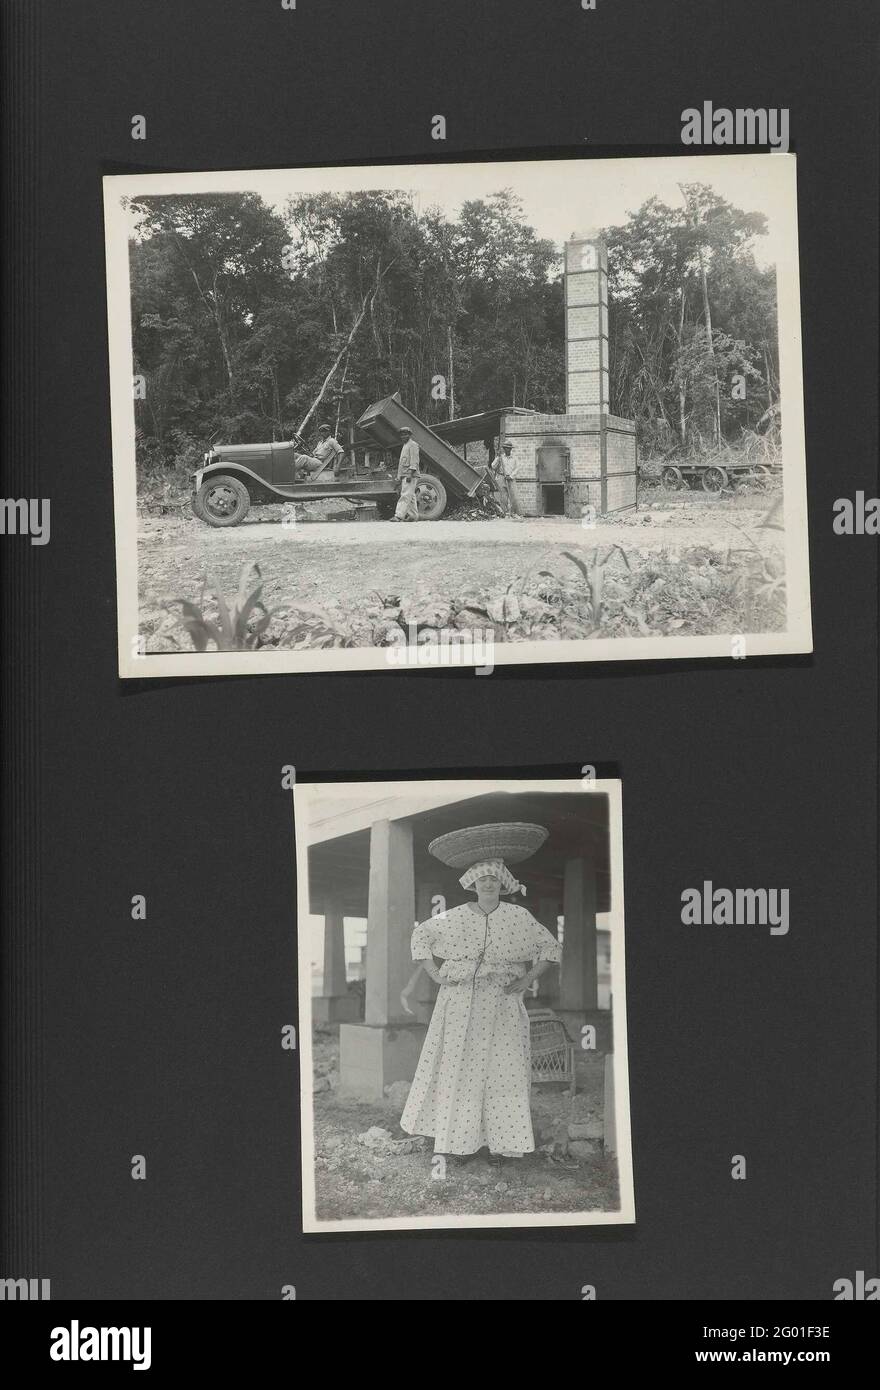 Daily life in Moengo. Album leaf with two photos from Moengo. Surinamese workers dumped with a truck waste at a combustion oven on the upper photos. On the lower photo a white woman (Mrs. Guilonard?) In Surinamese Koto. Part of the Guilonard family album over the bauxite mining in Moengo and Albina in Suriname in the 1929-1930. Stock Photo